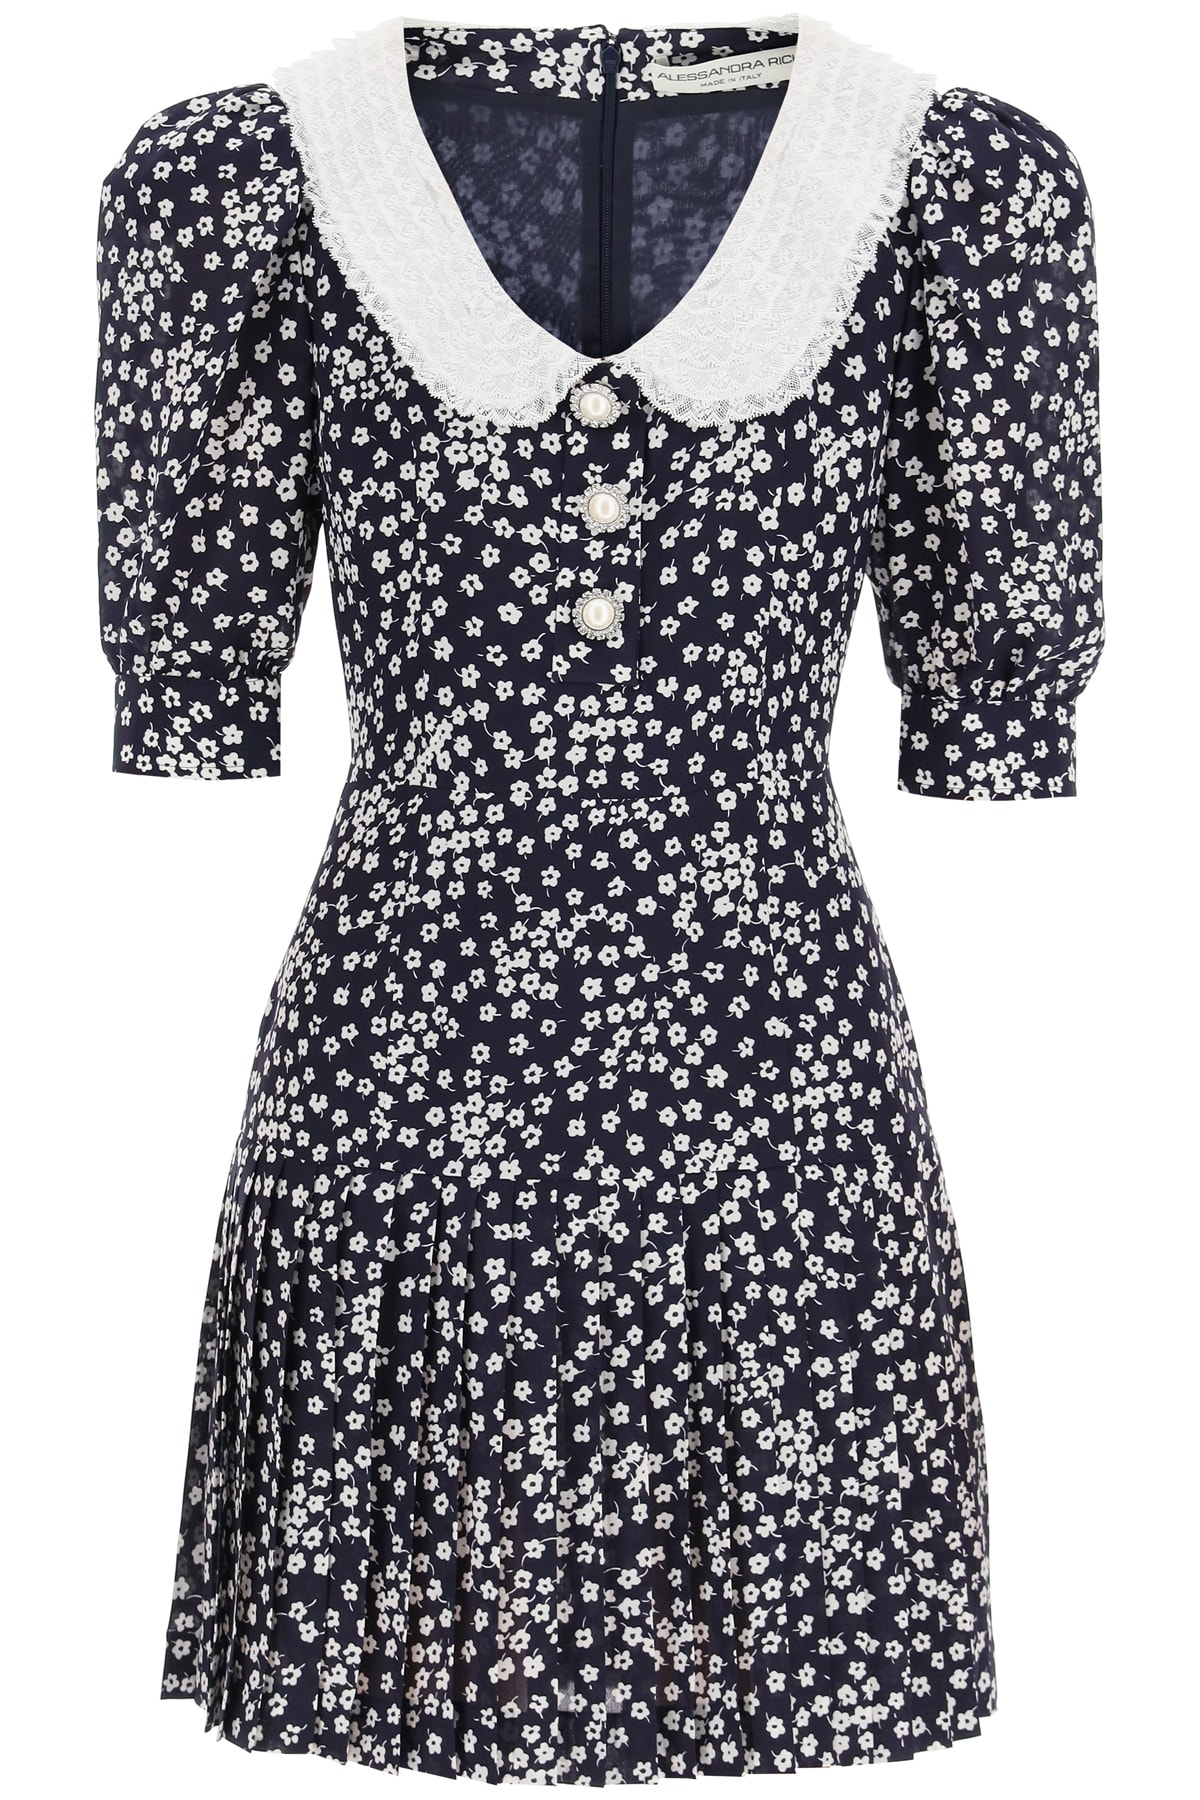 Alessandra Rich Mini Dress With Lace Collar And Jewel Buttons